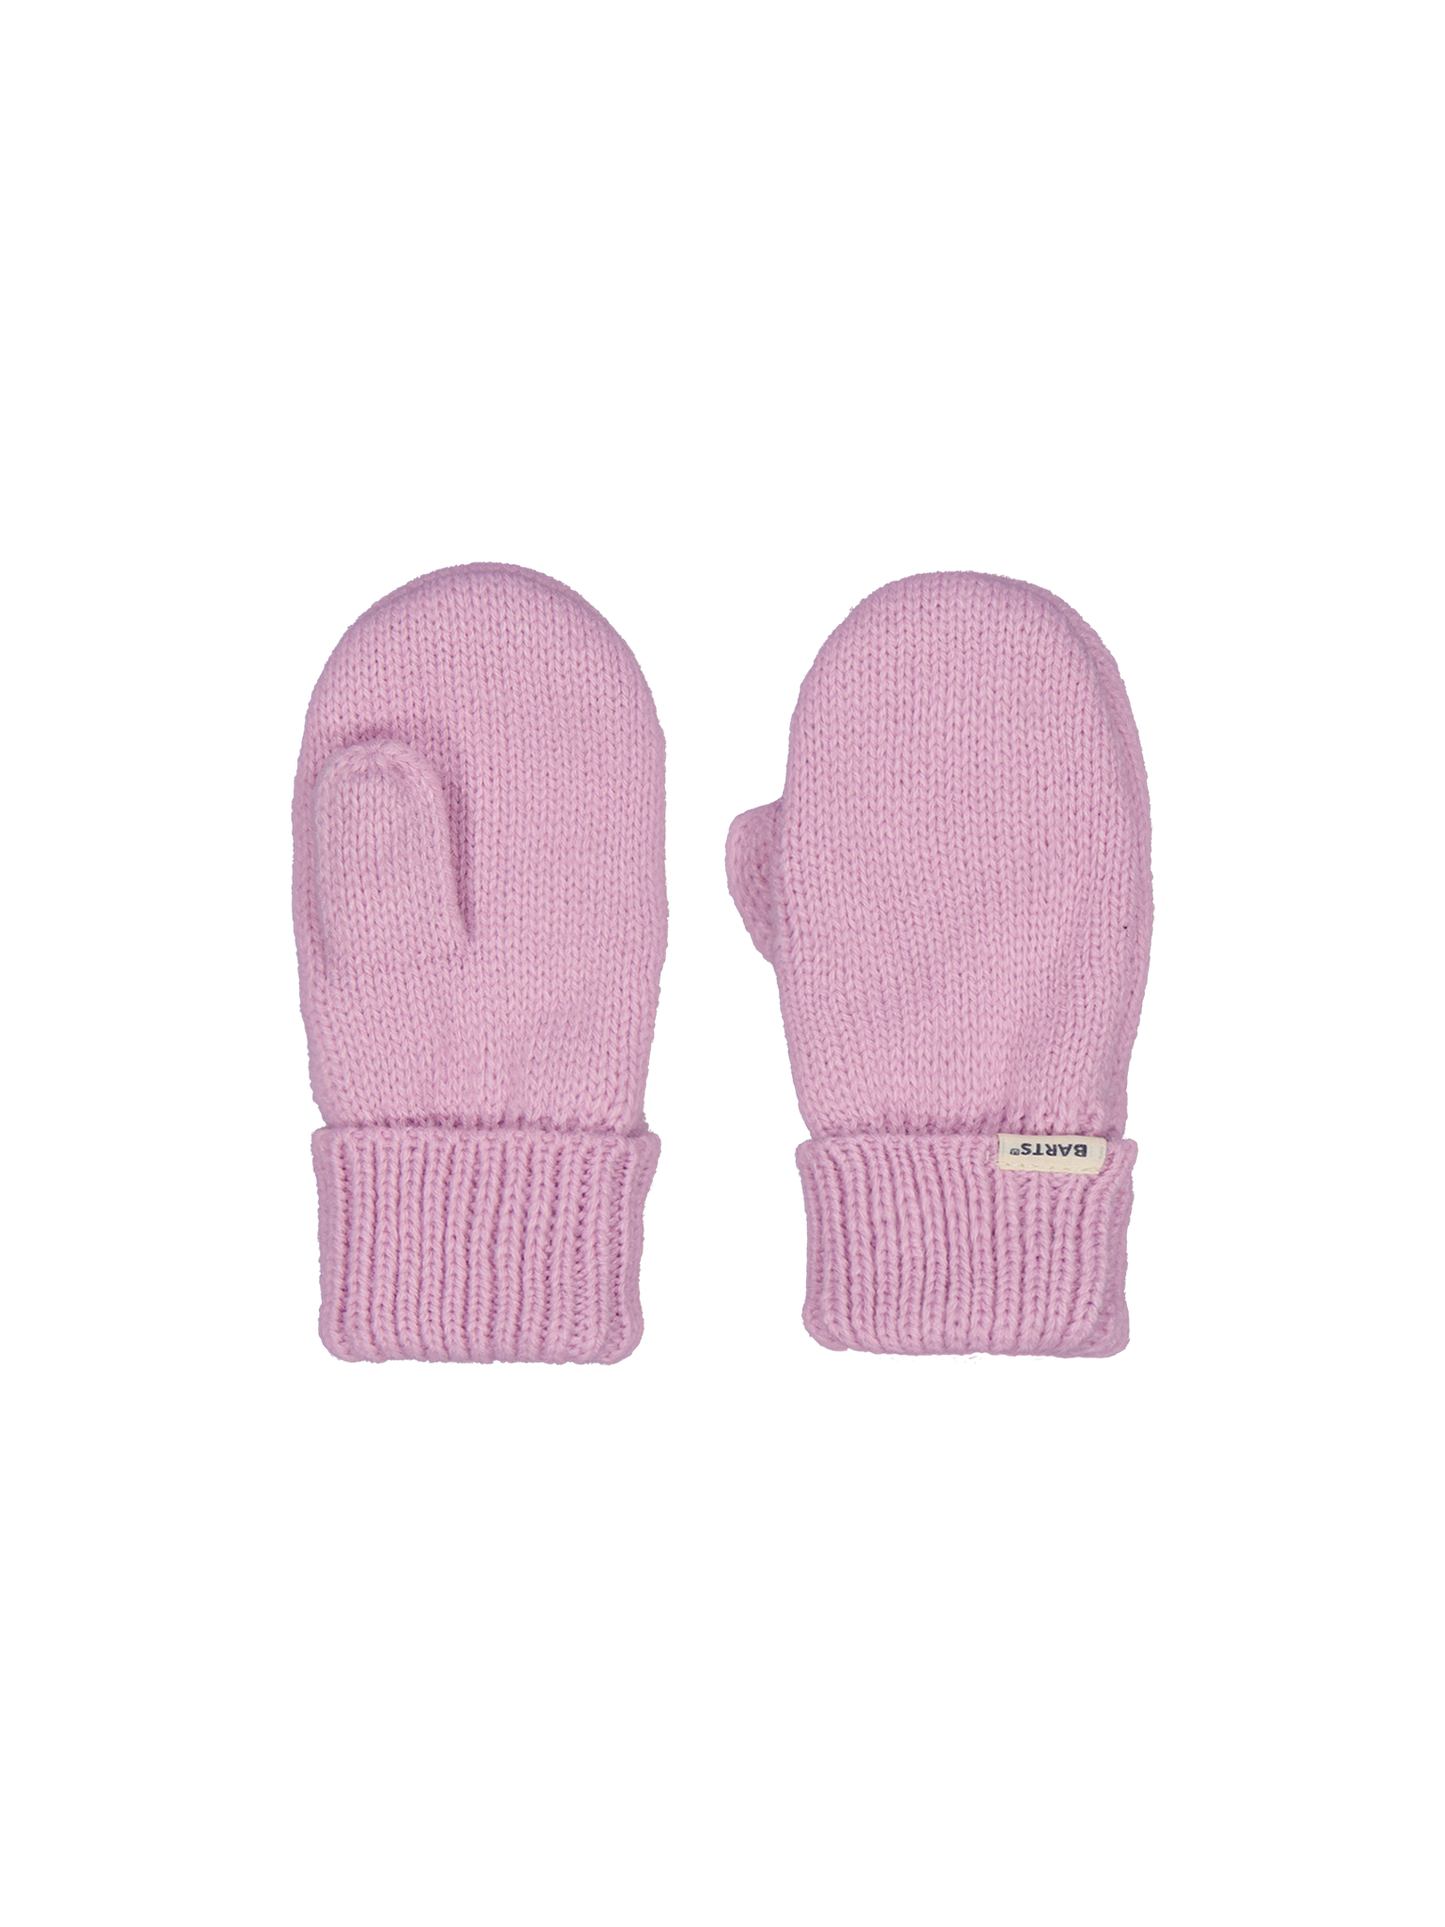 Milo Baby Mittens - Orchid